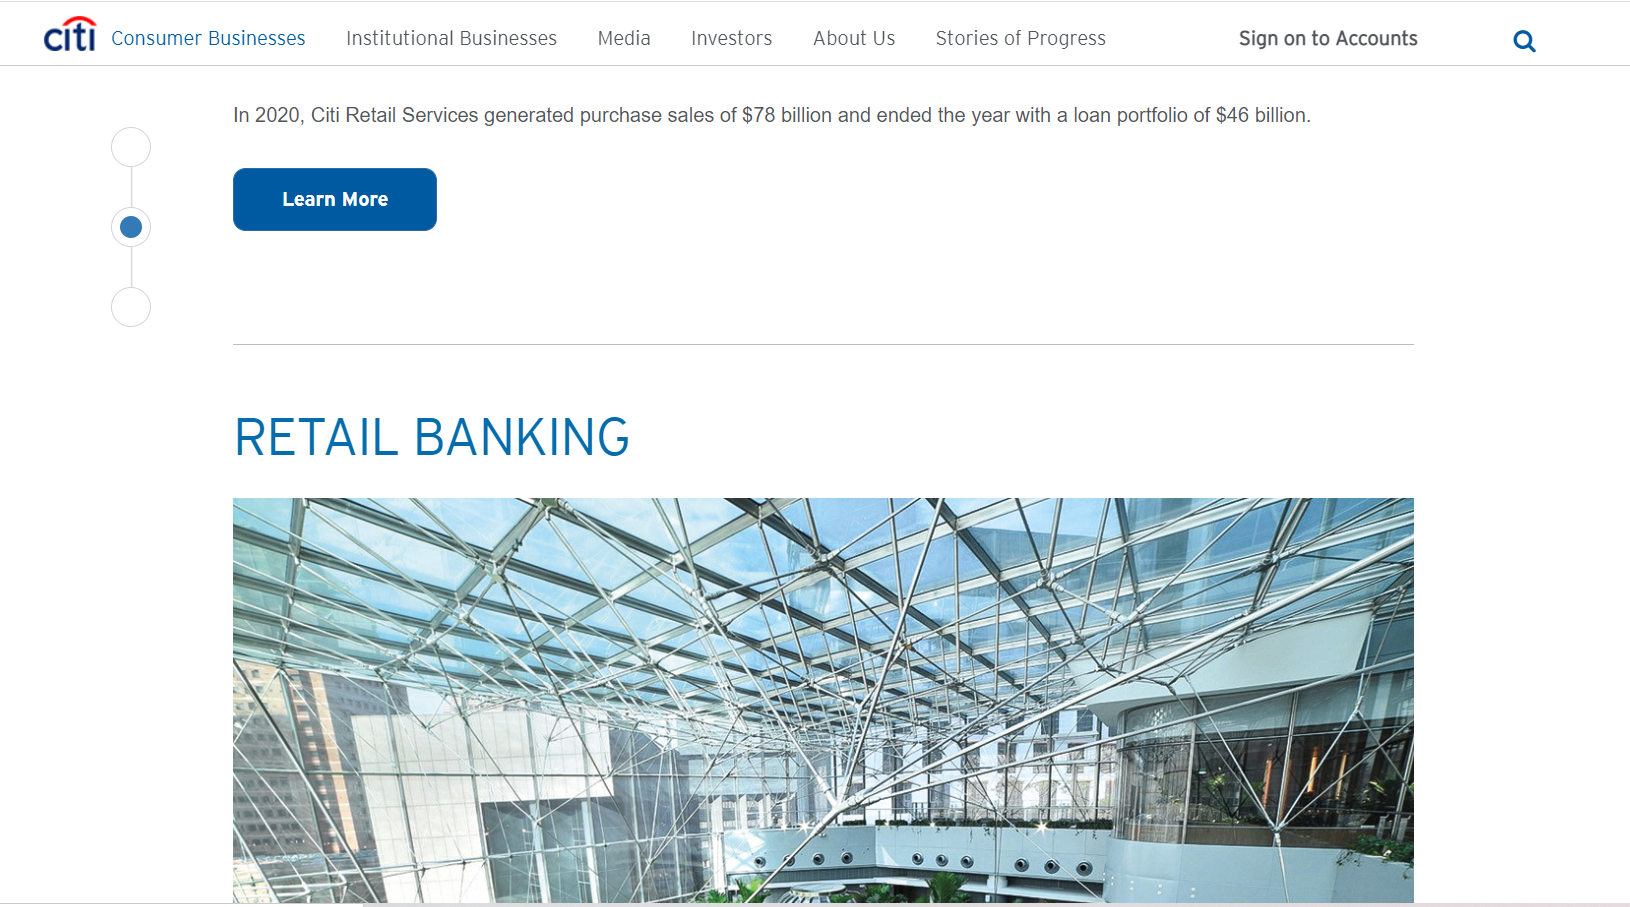 CitiGroup offsets blue with plenty of white space in their website design